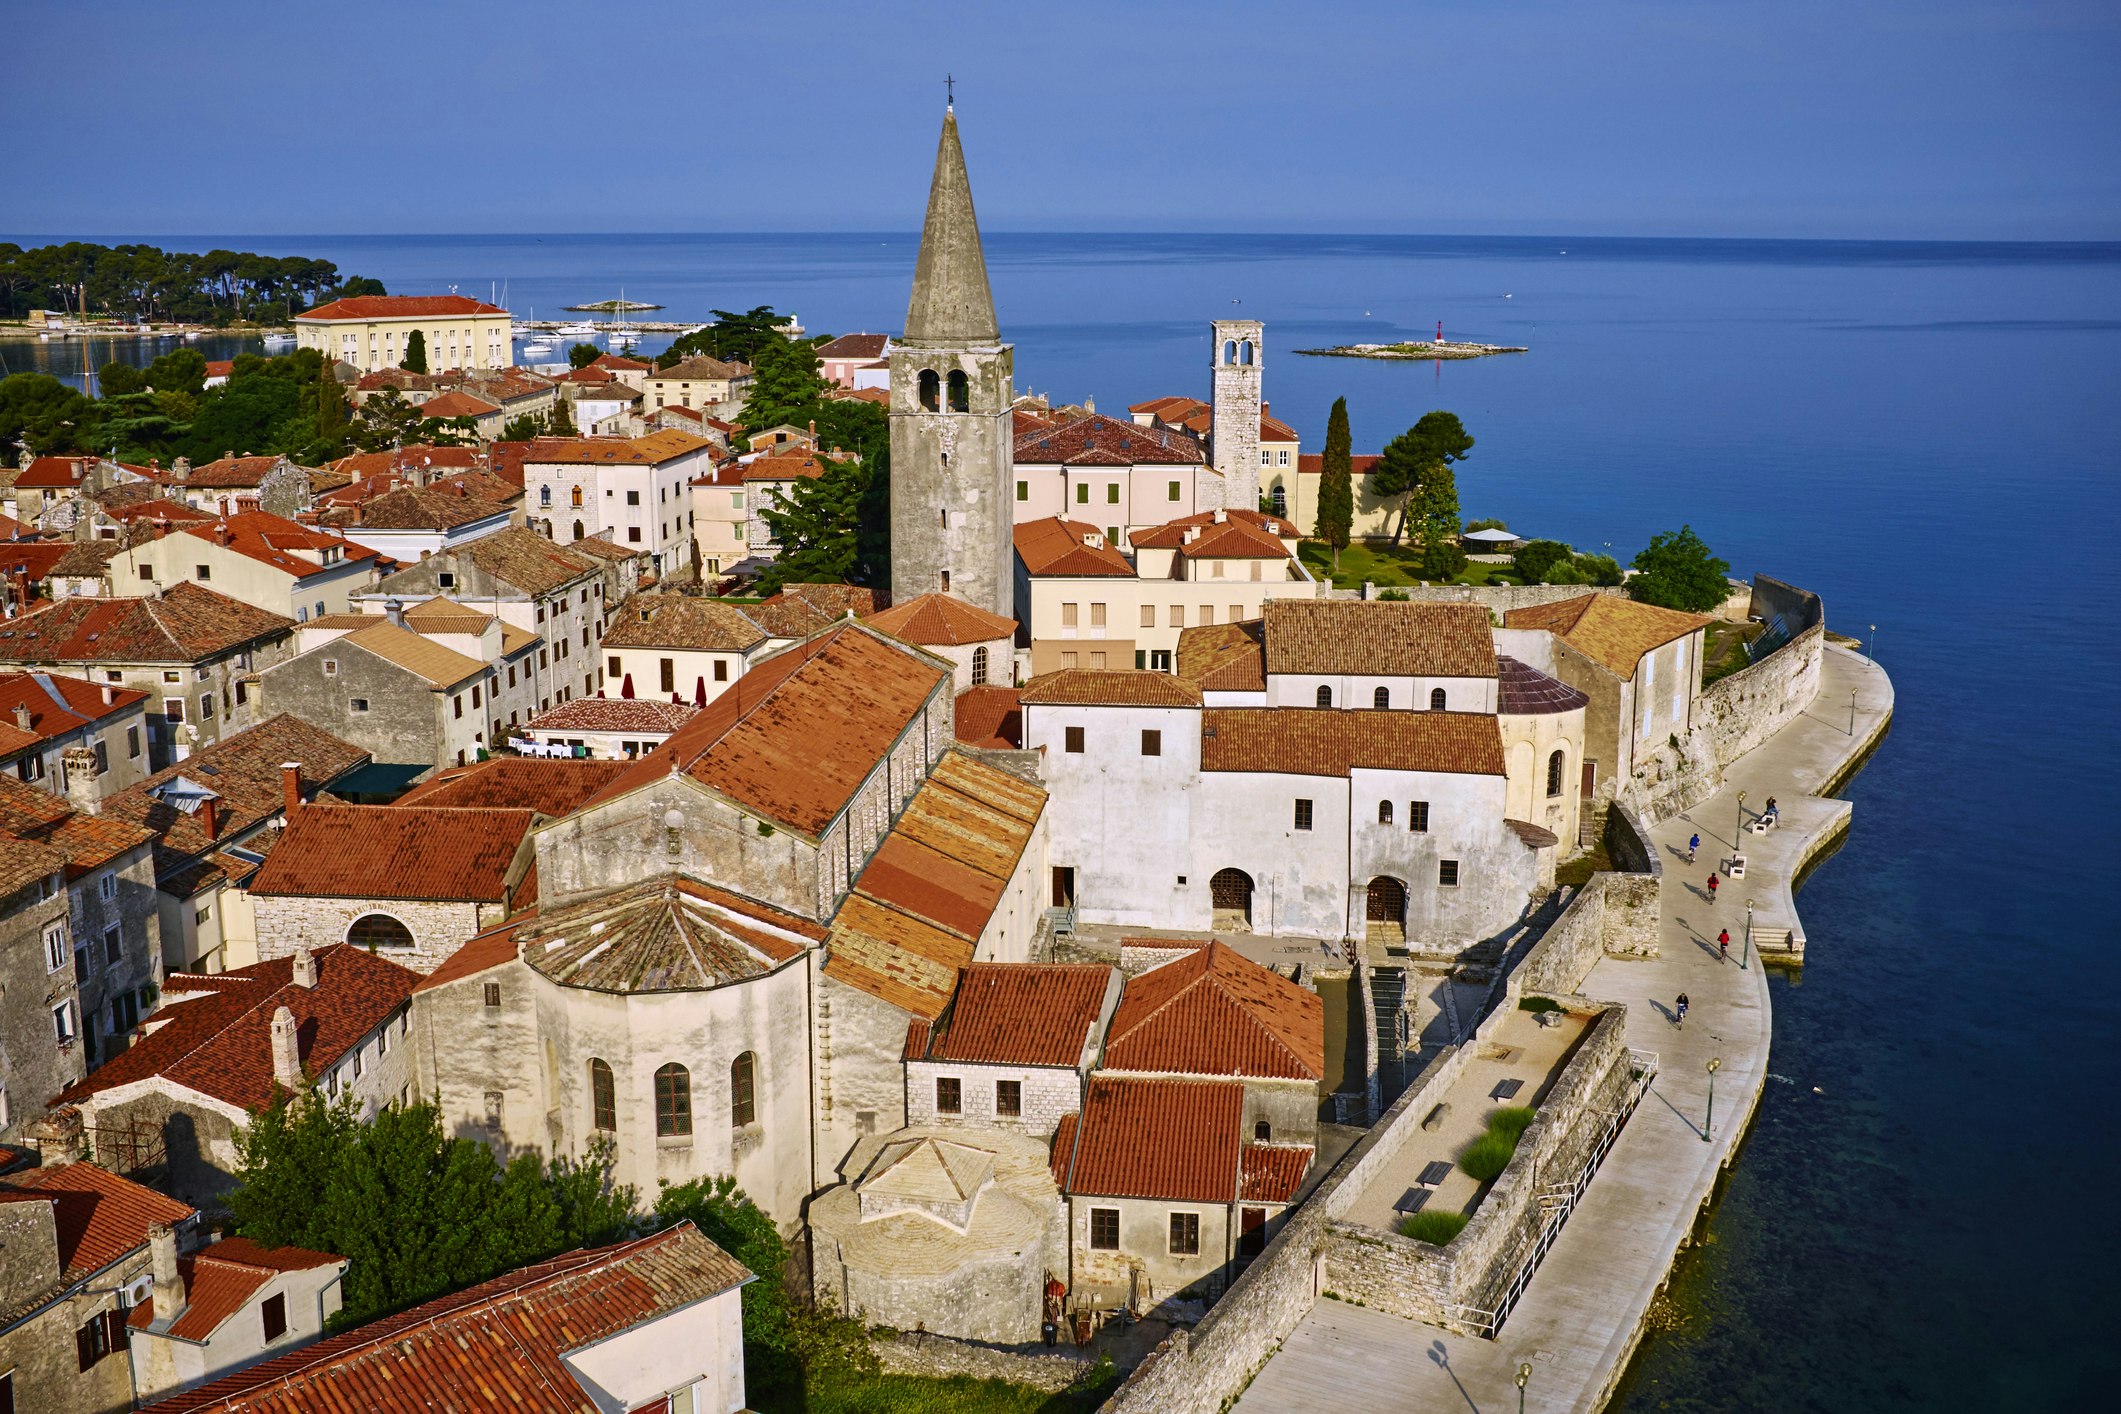 The red roofs and grey and white buildings of Porec, Croatia extend out into the deep blue sea, the same color as the sky on the horizon. In the forground you can clearly see the Euphrasian Basilica, its tall bell tower opposite the viewer